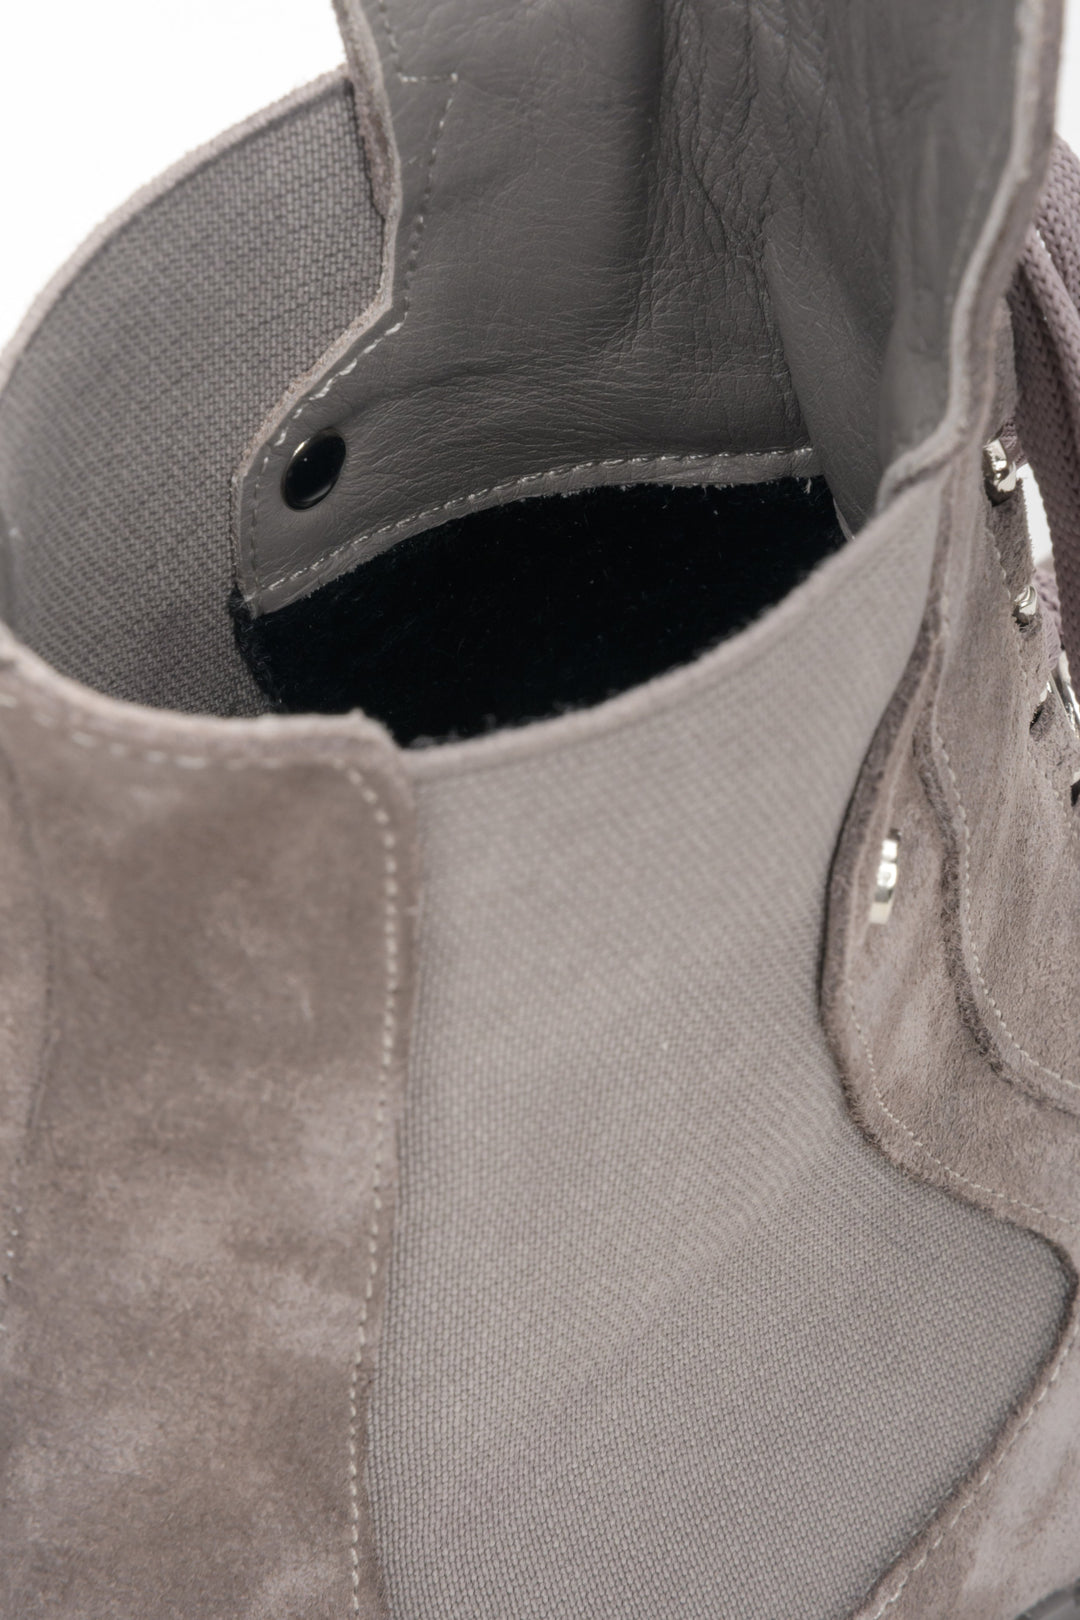 Women's velour and textile ankle boots in grey - close-up on details.